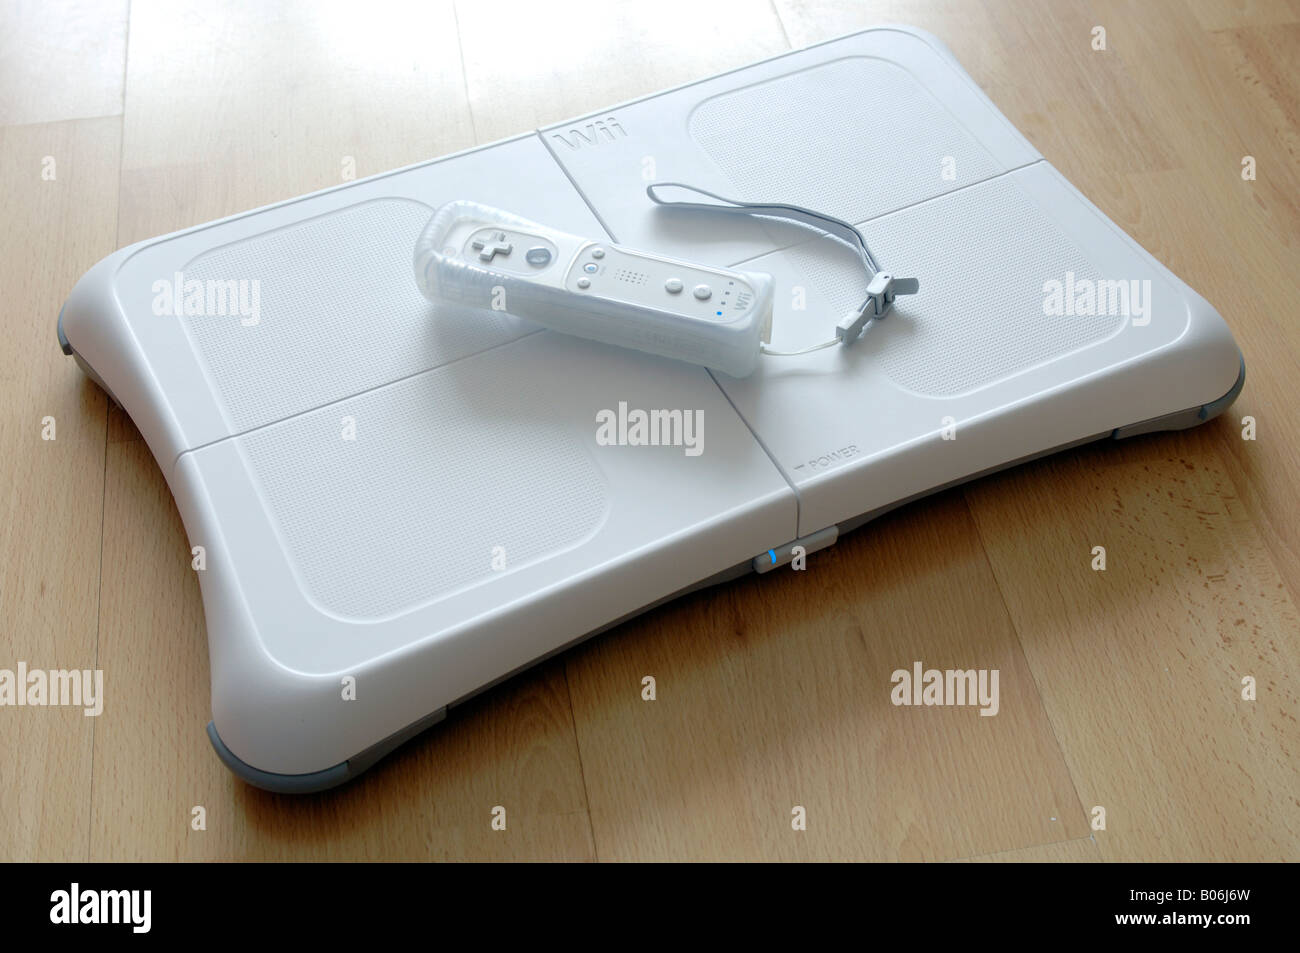 Nintendo Wii Balance Board High Resolution Stock Photography and Images -  Alamy